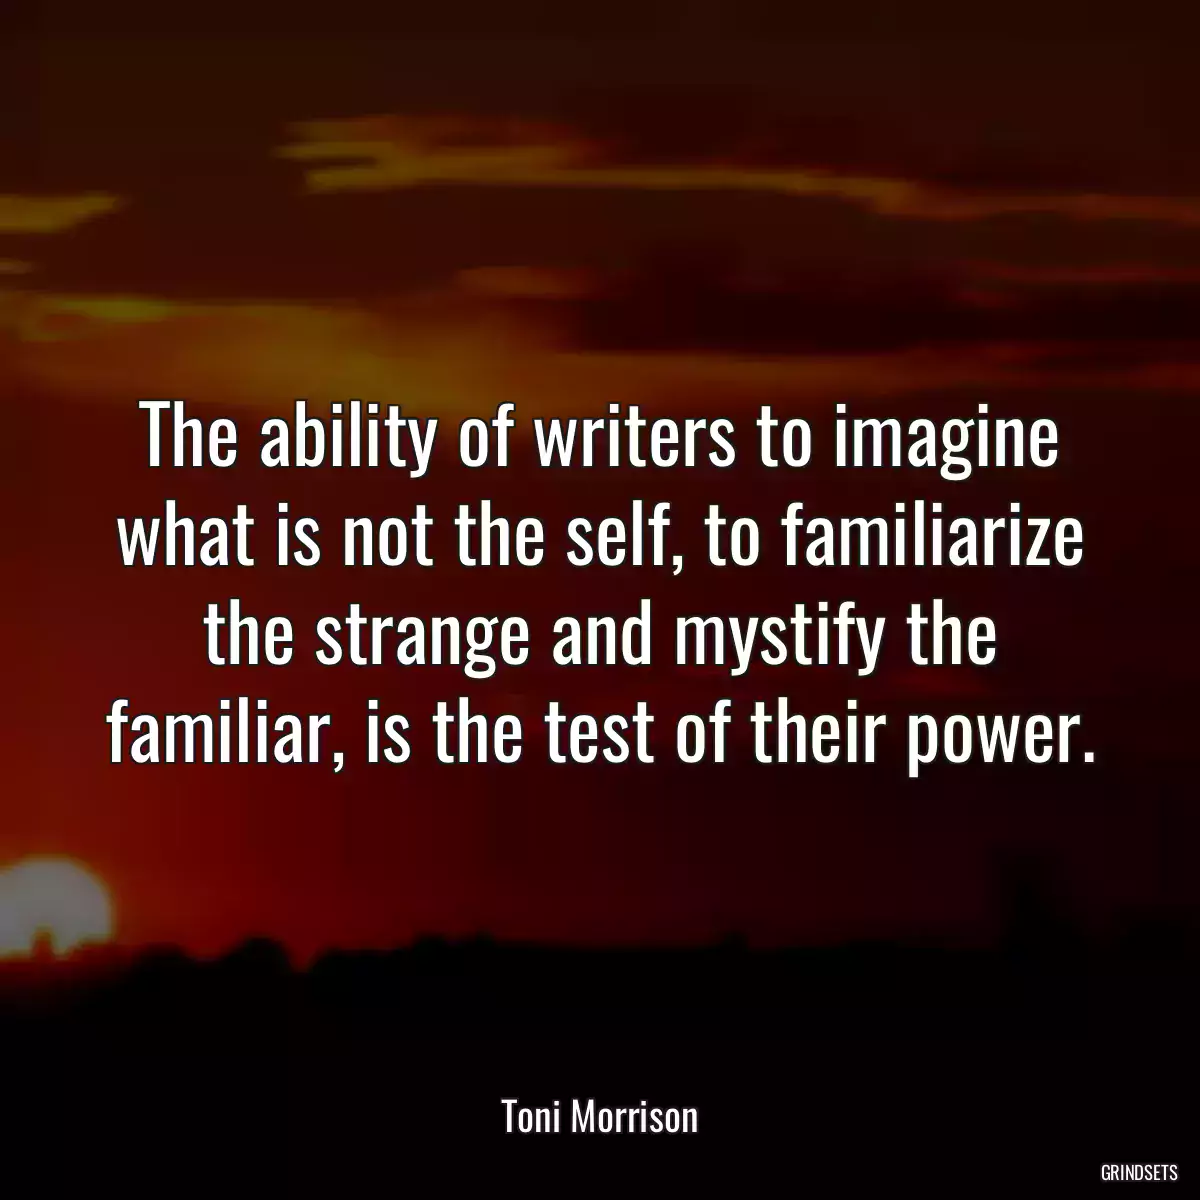 The ability of writers to imagine what is not the self, to familiarize the strange and mystify the familiar, is the test of their power.